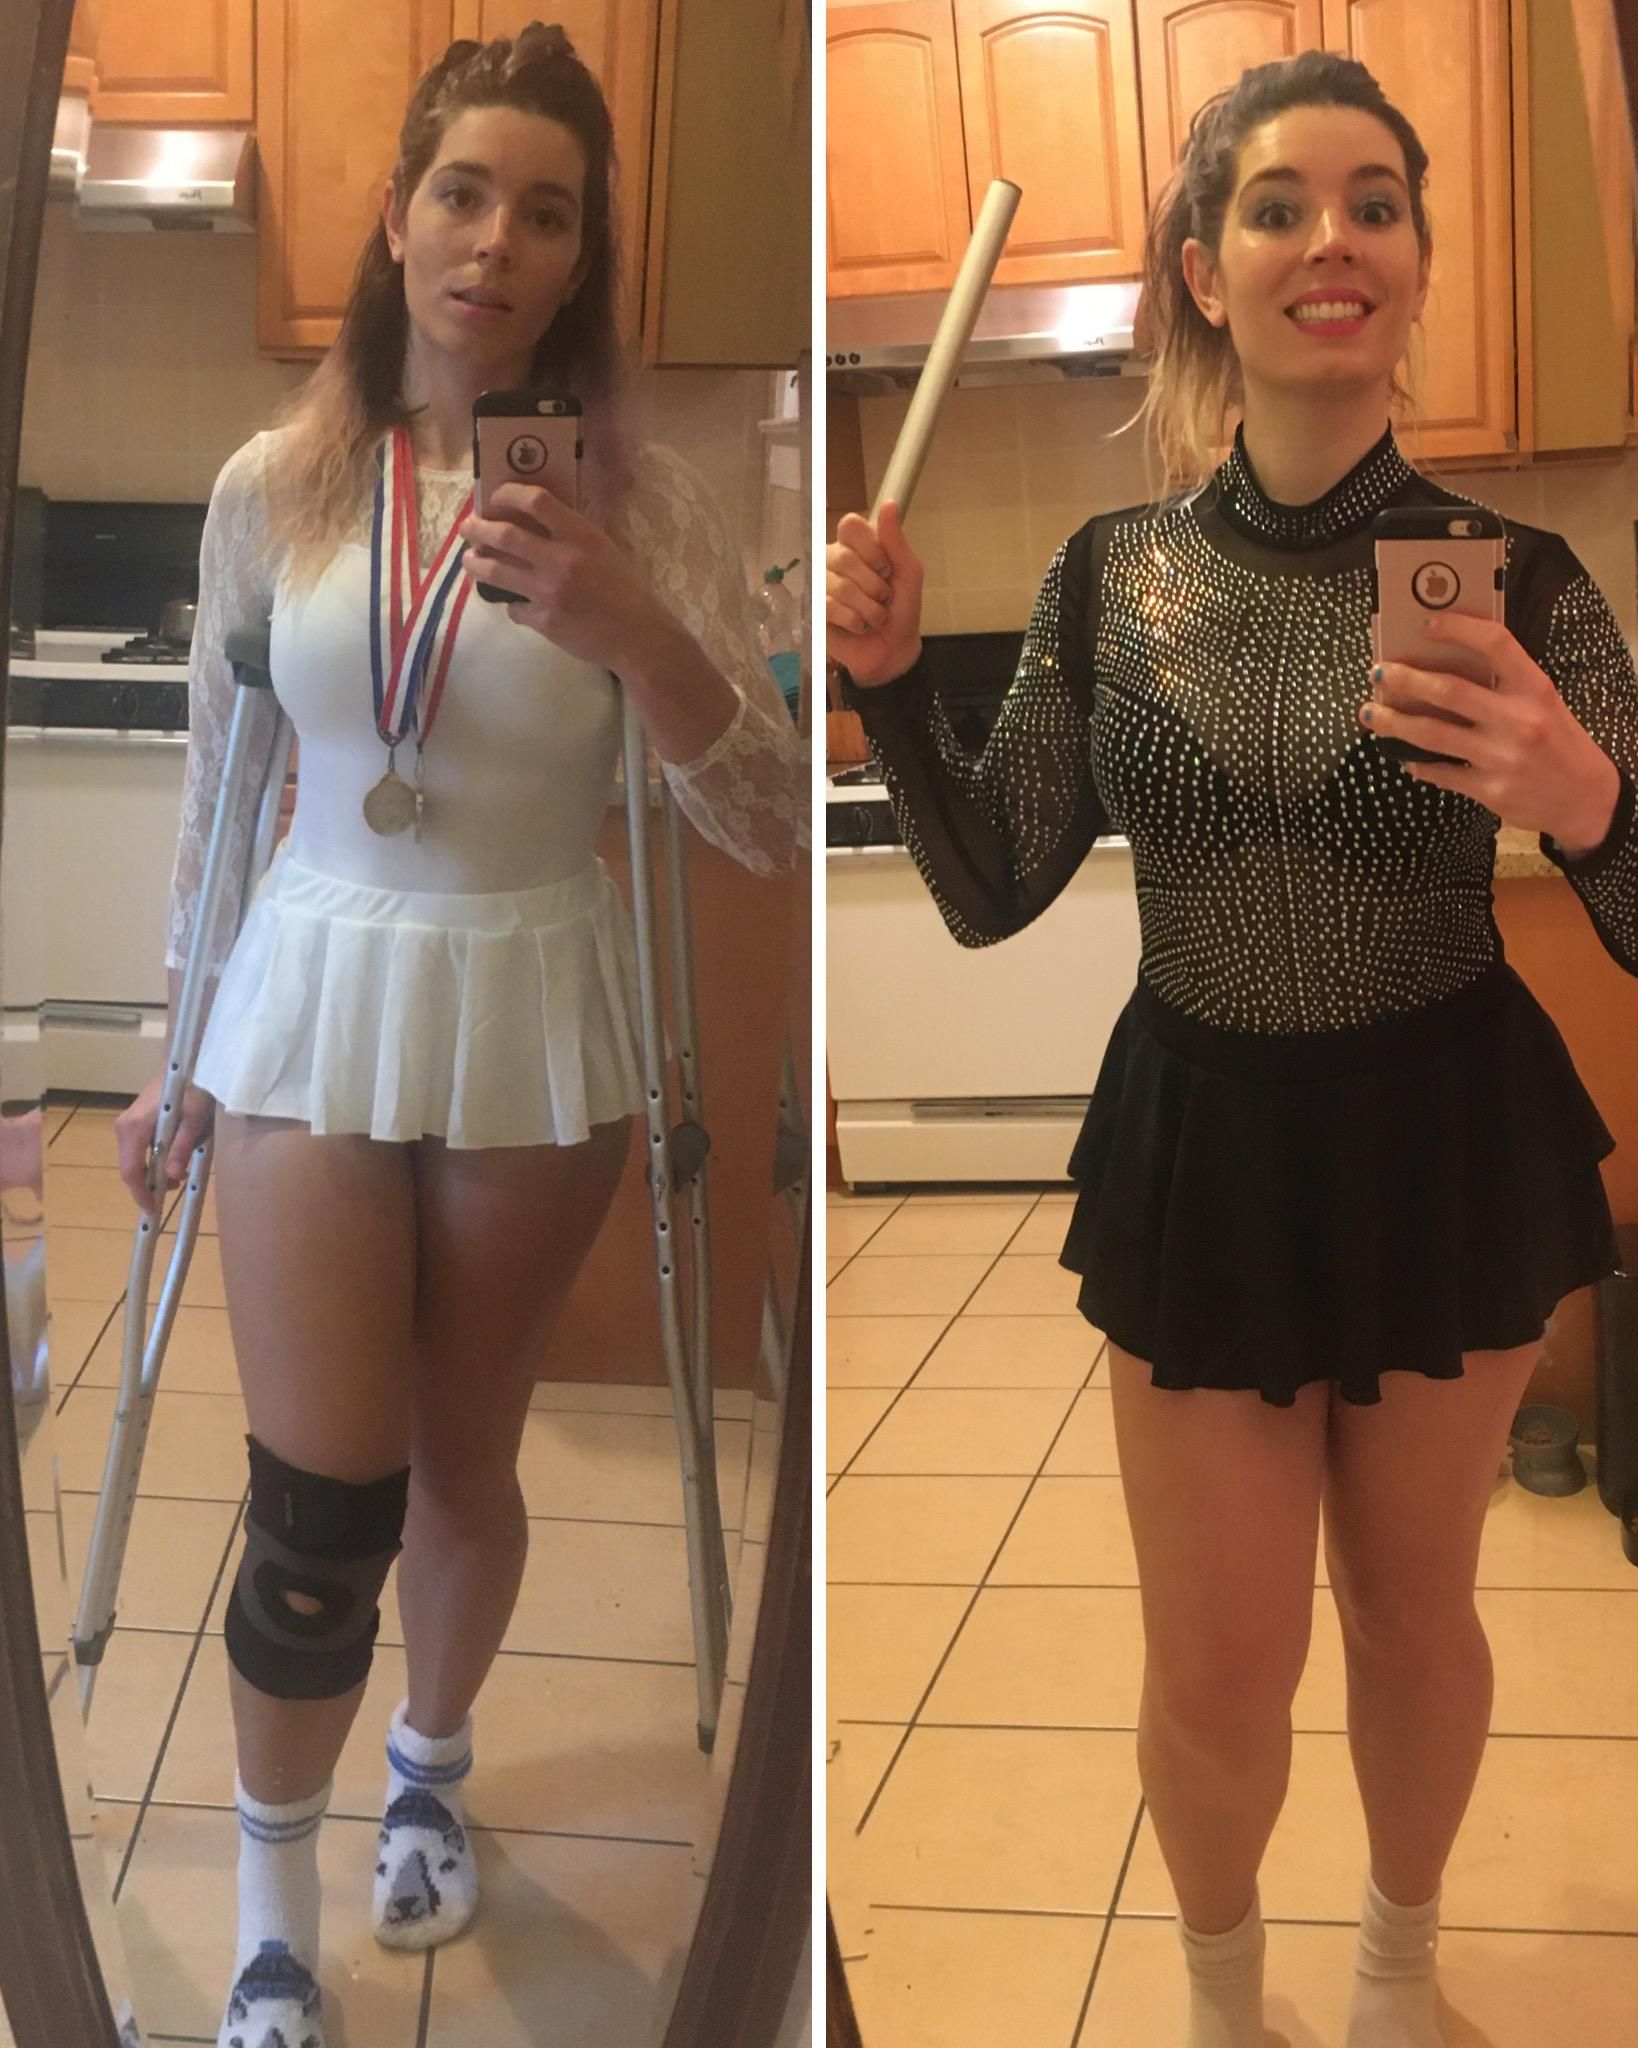 Was on Crutches Last Halloween & Went as Nancy Kerrigan - This Year Obviously Had to be Tonya Harding